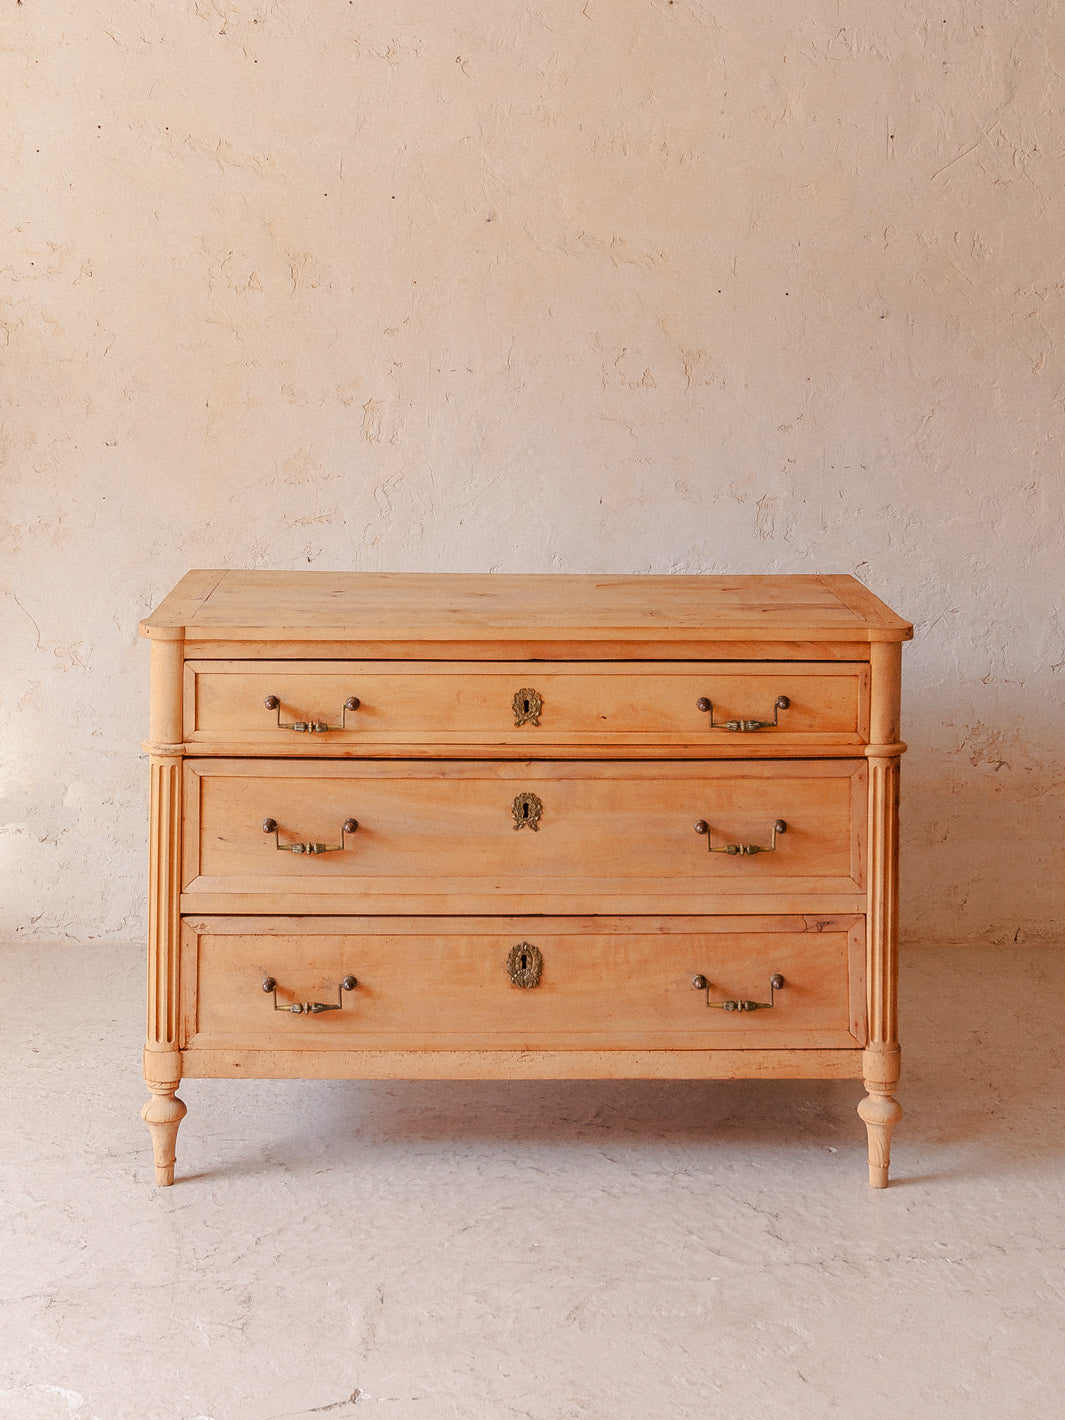 19th century washed chestnut French chest of drawers